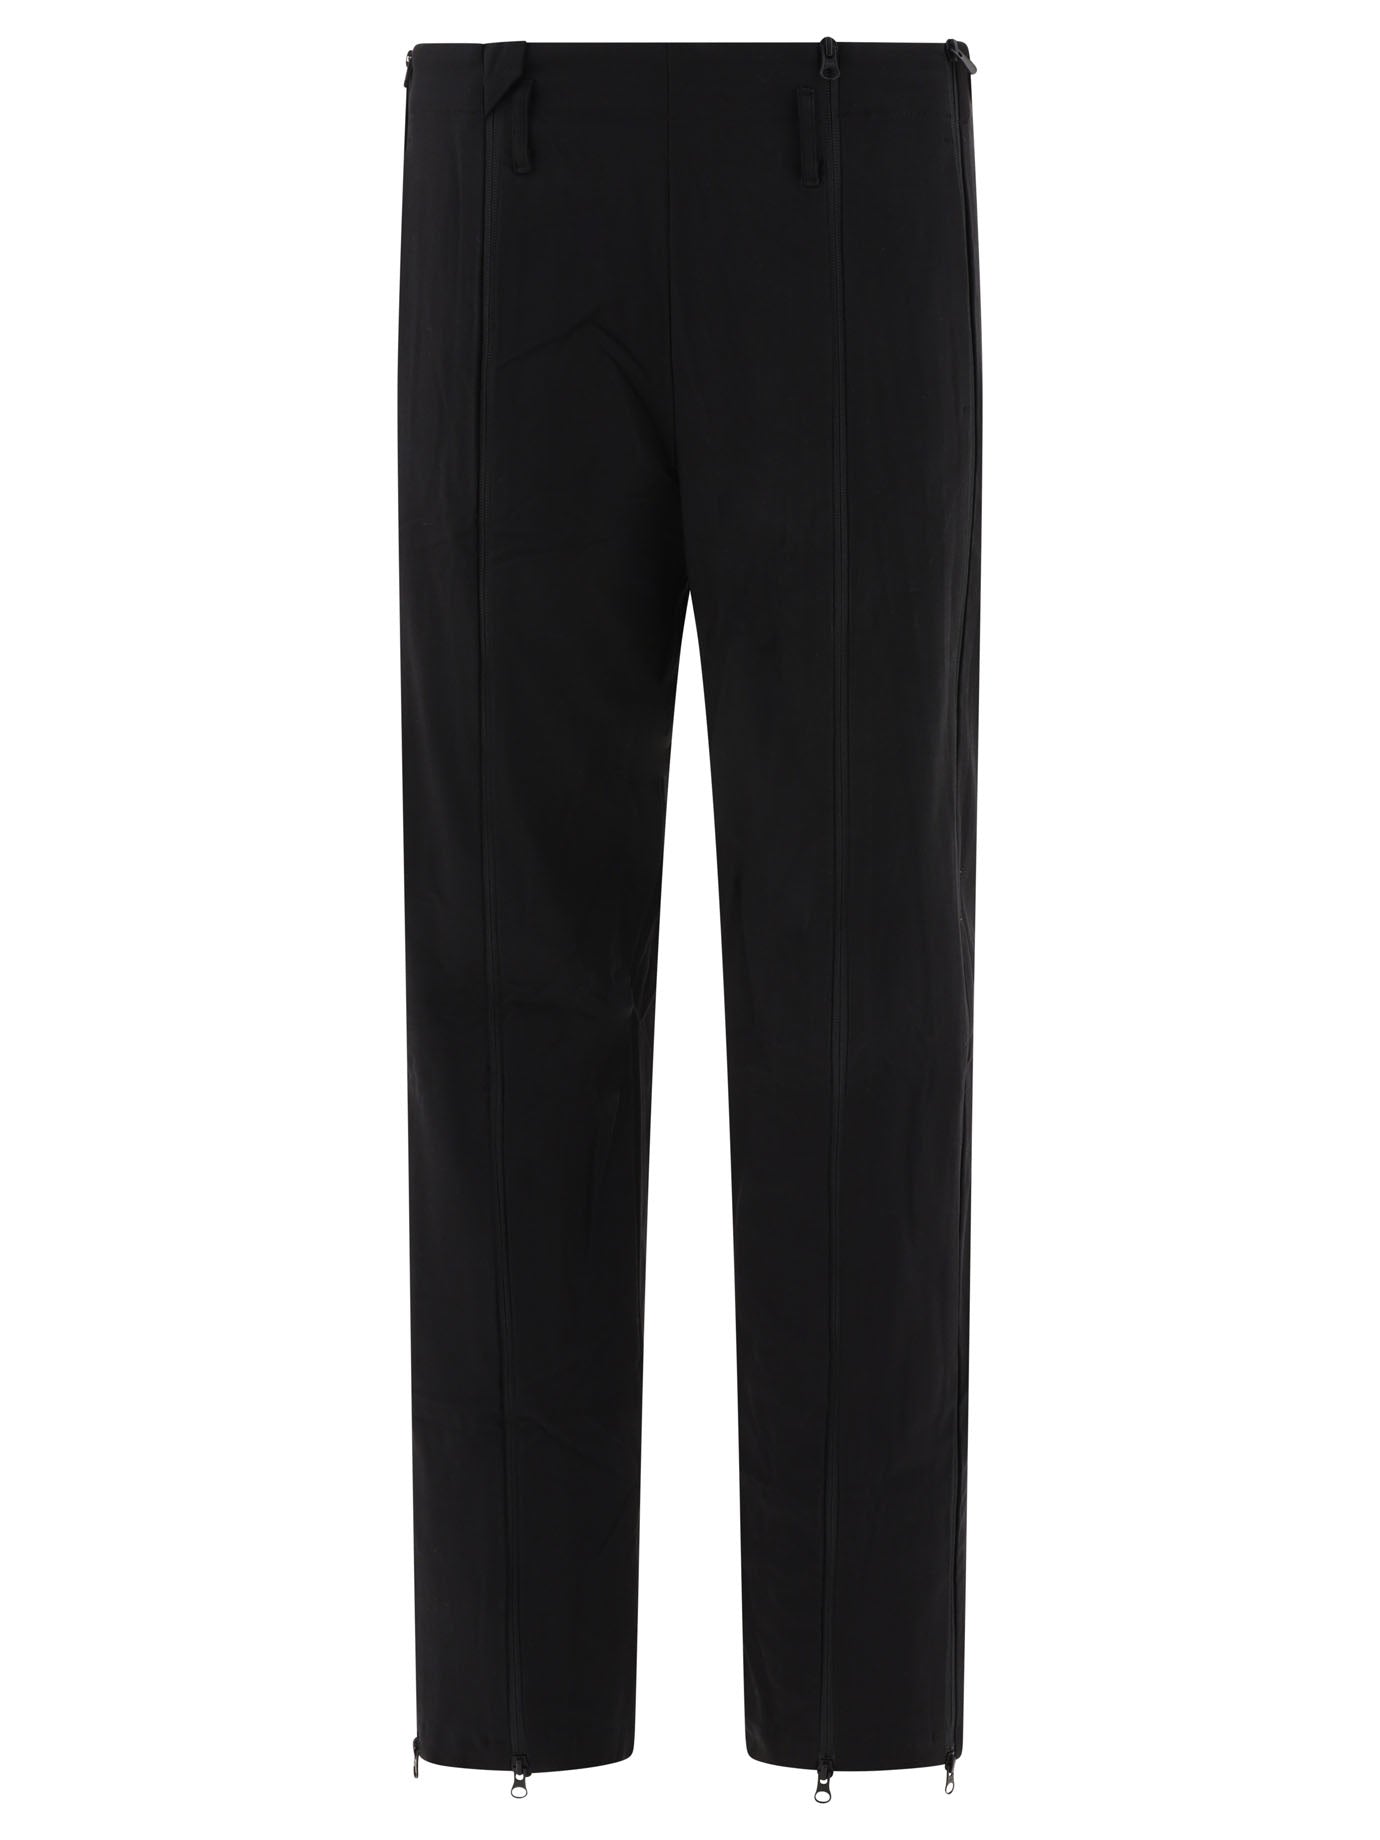 Post Archive Faction (paf) 5.1 Center Trousers Black